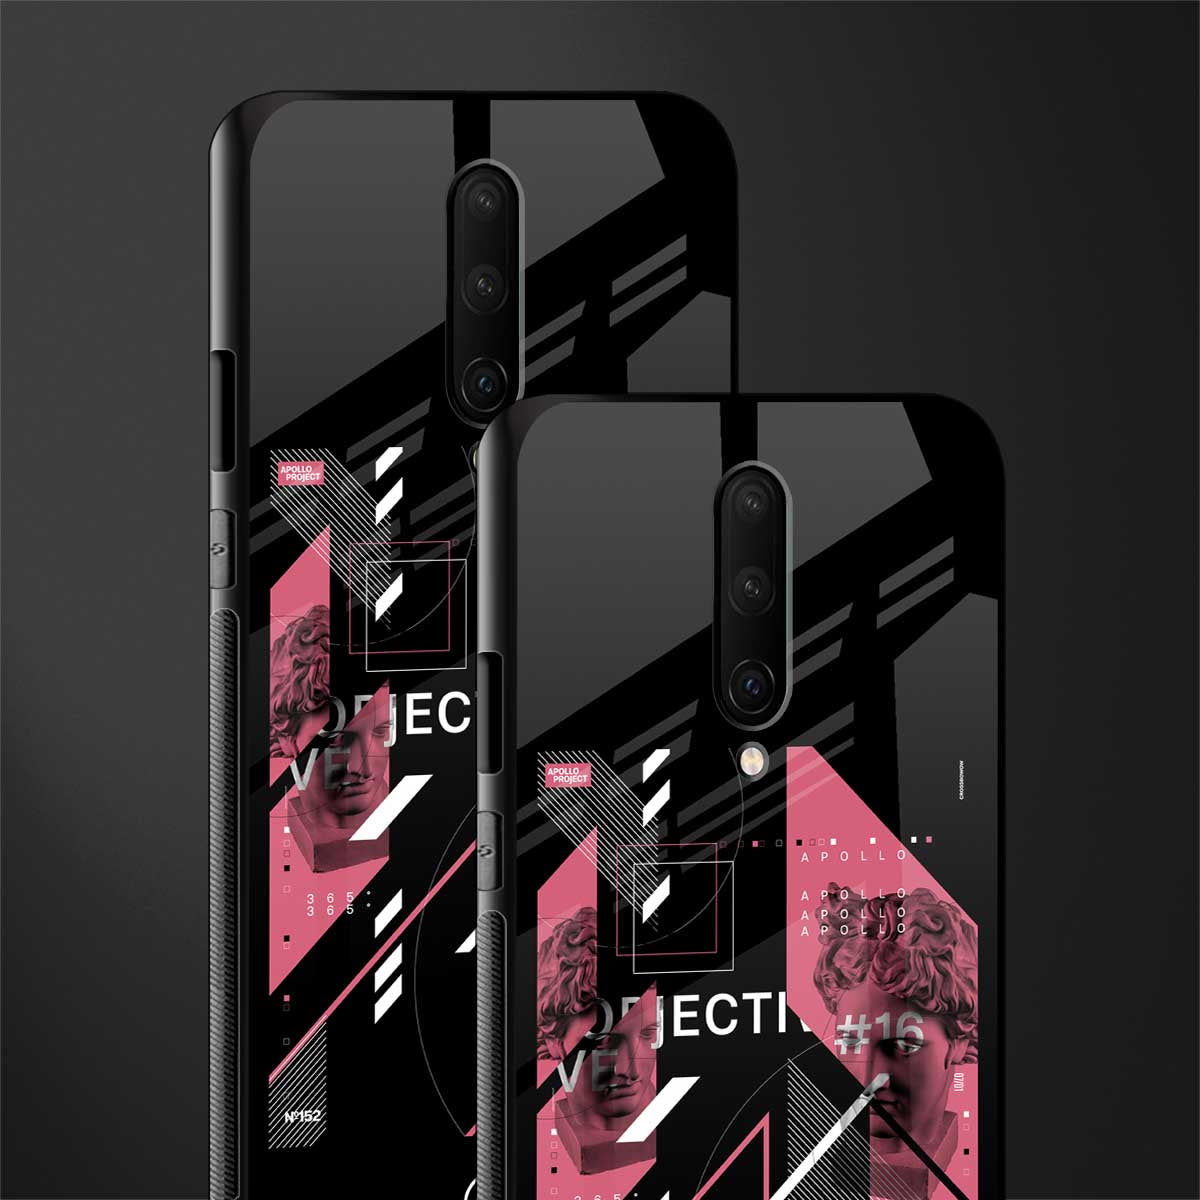 apollo project aesthetic pink and black glass case for oneplus 7 pro image-2